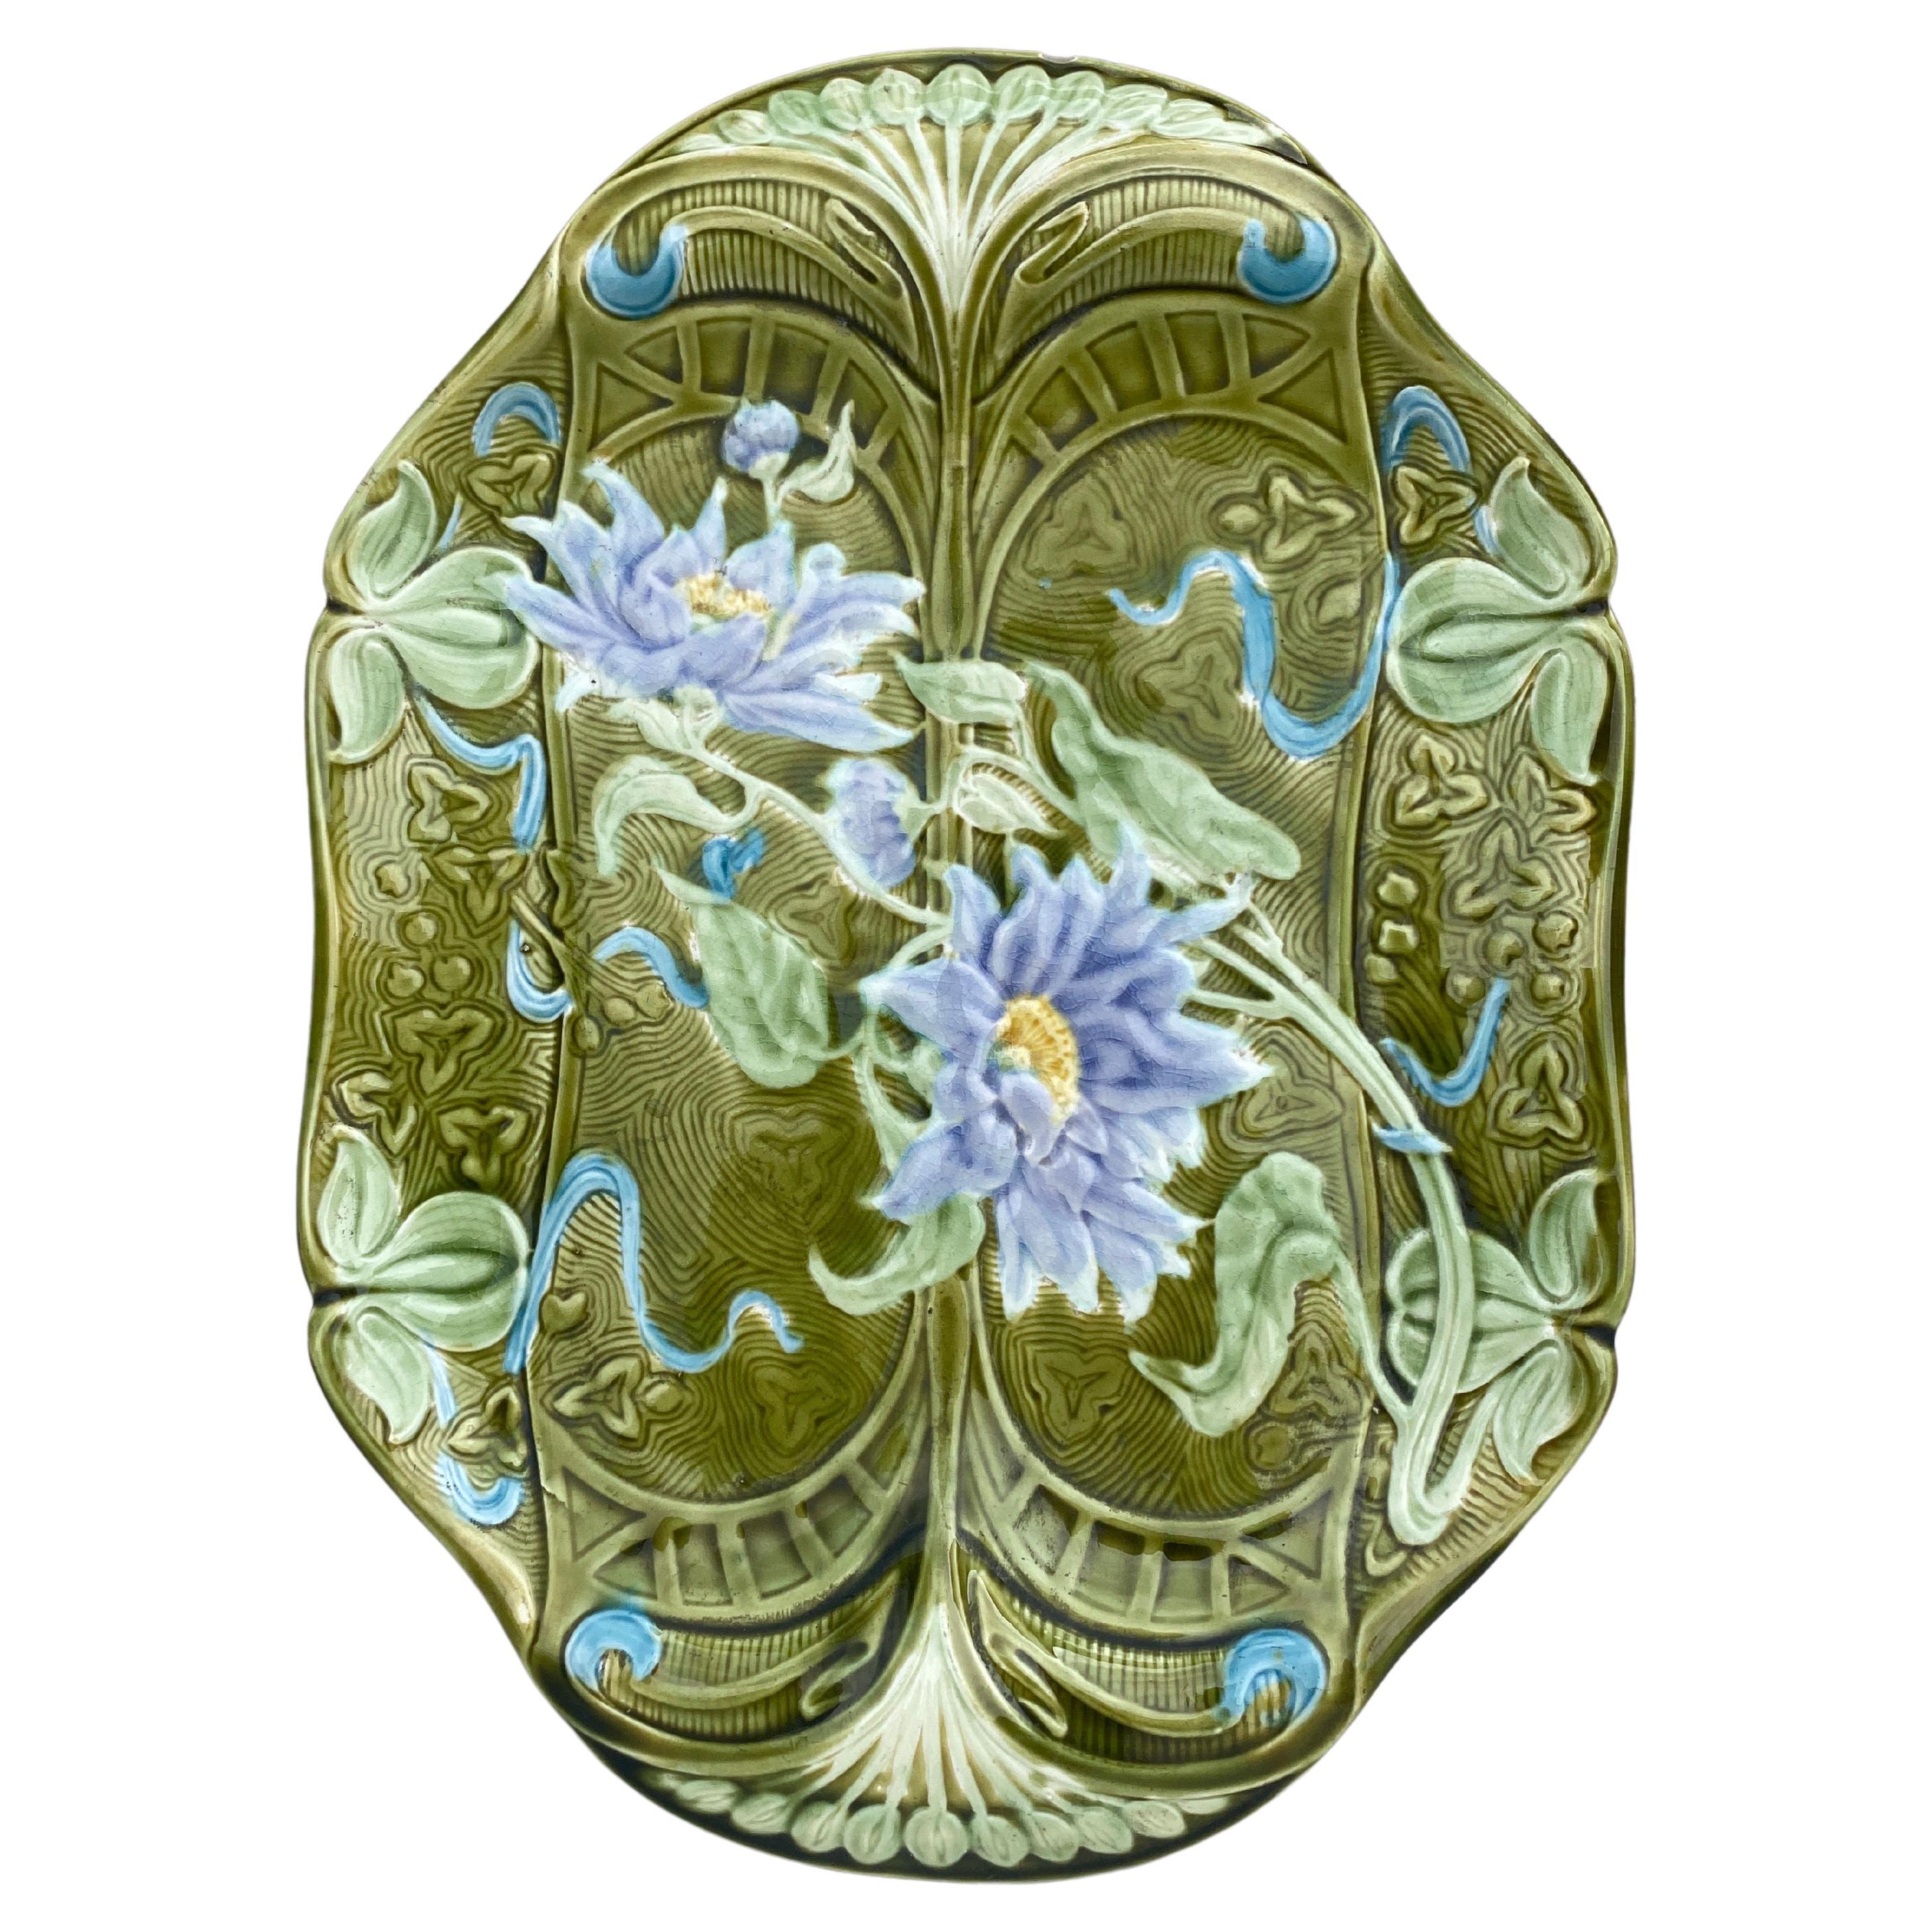 Majolica asparagus platter by Keller and Guerin, manufacturer of Saint Clement, circa 1900.
Decorated with purple Chrysanthemums.